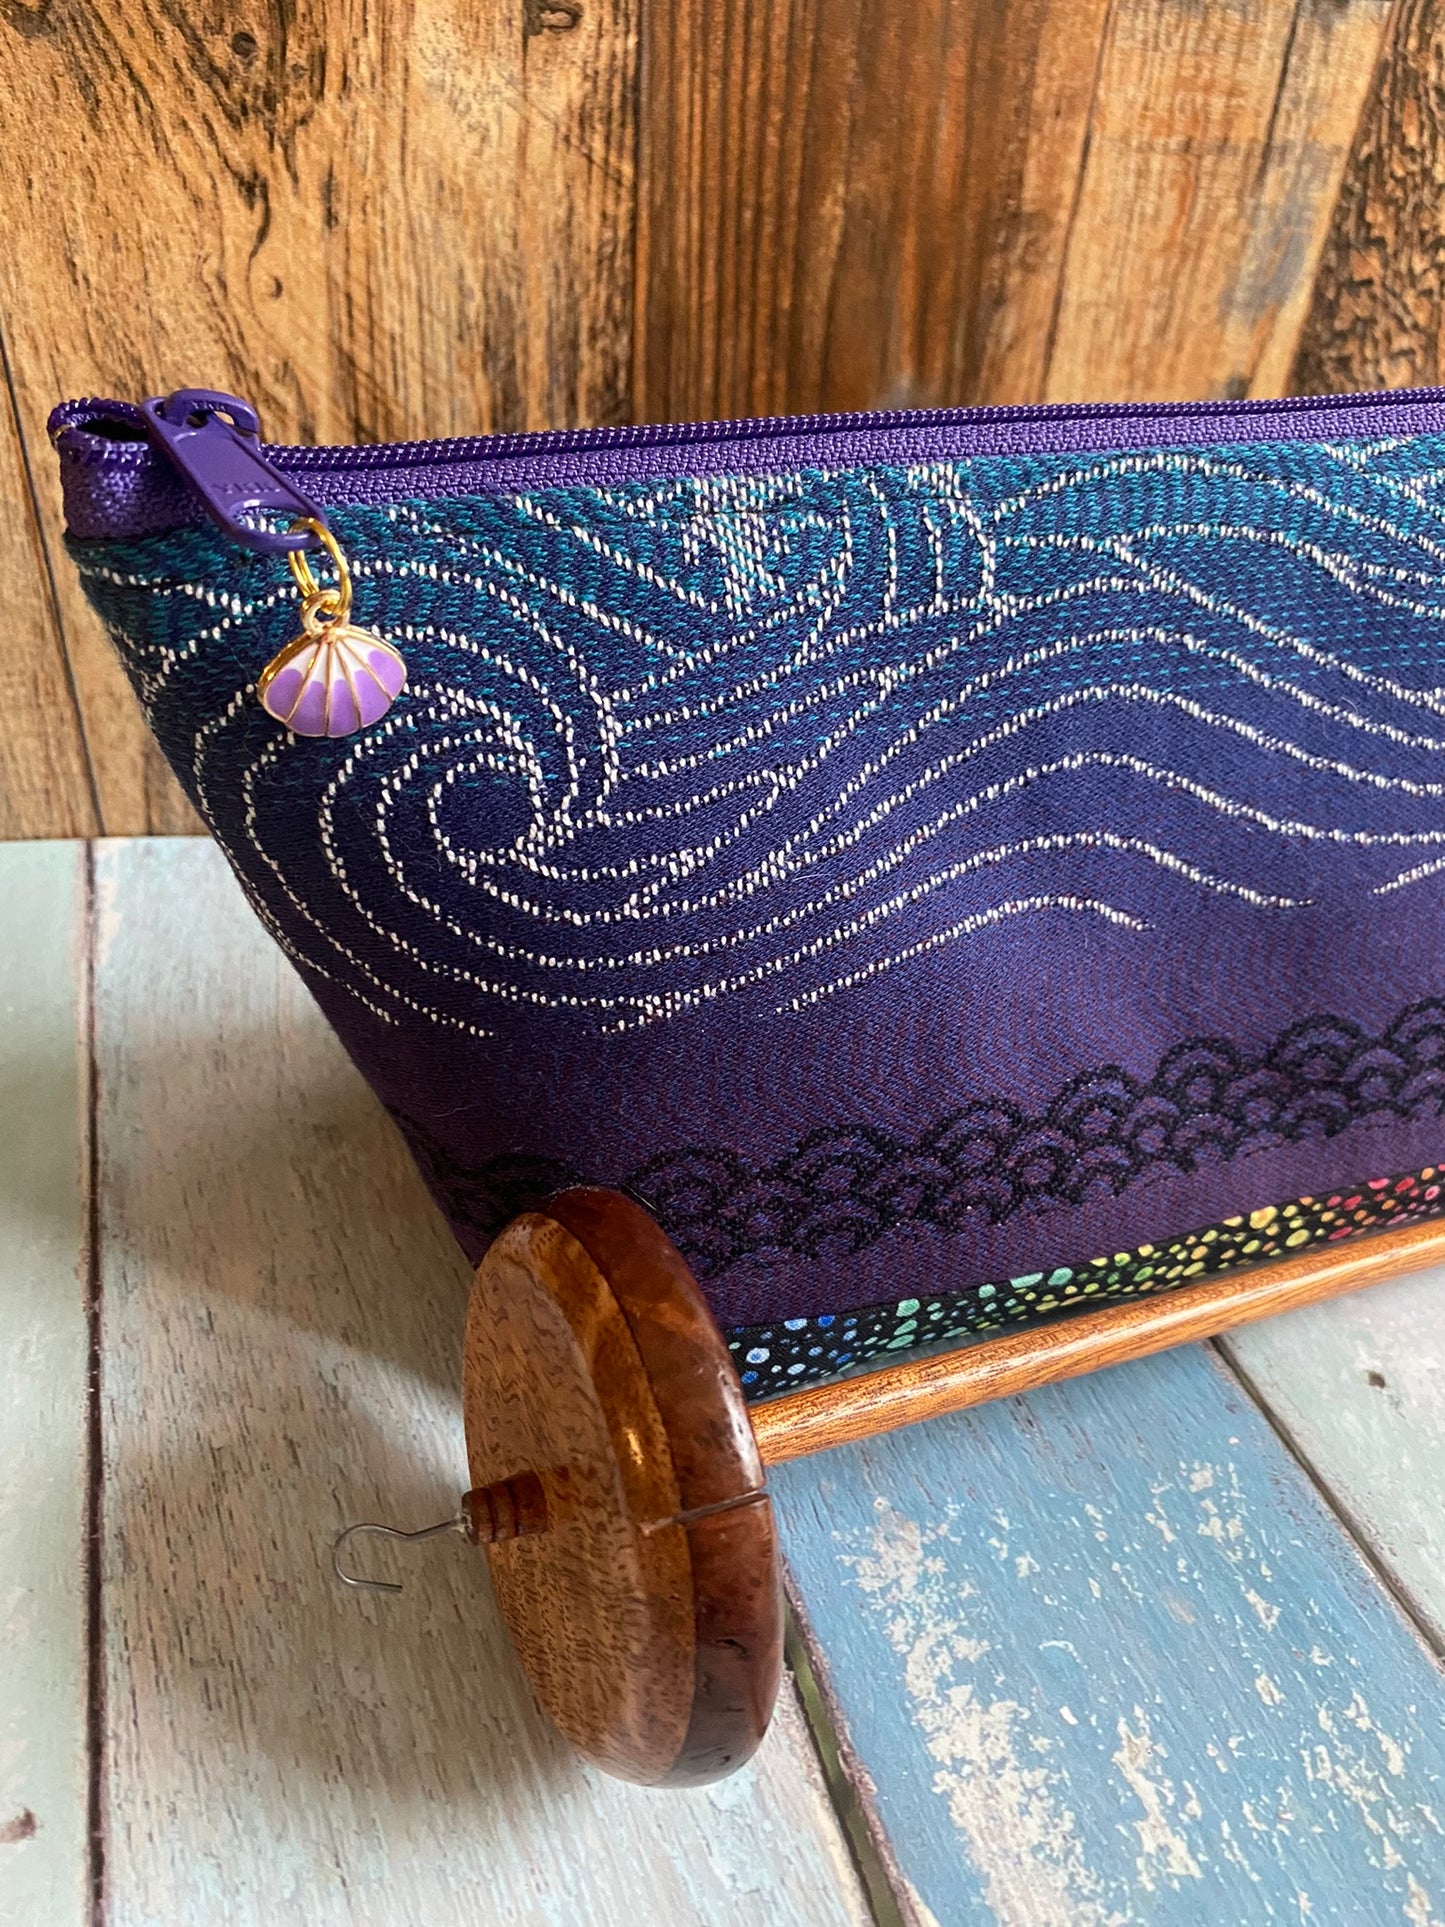 Large Sea Dragon Open Wide Spindle Bag